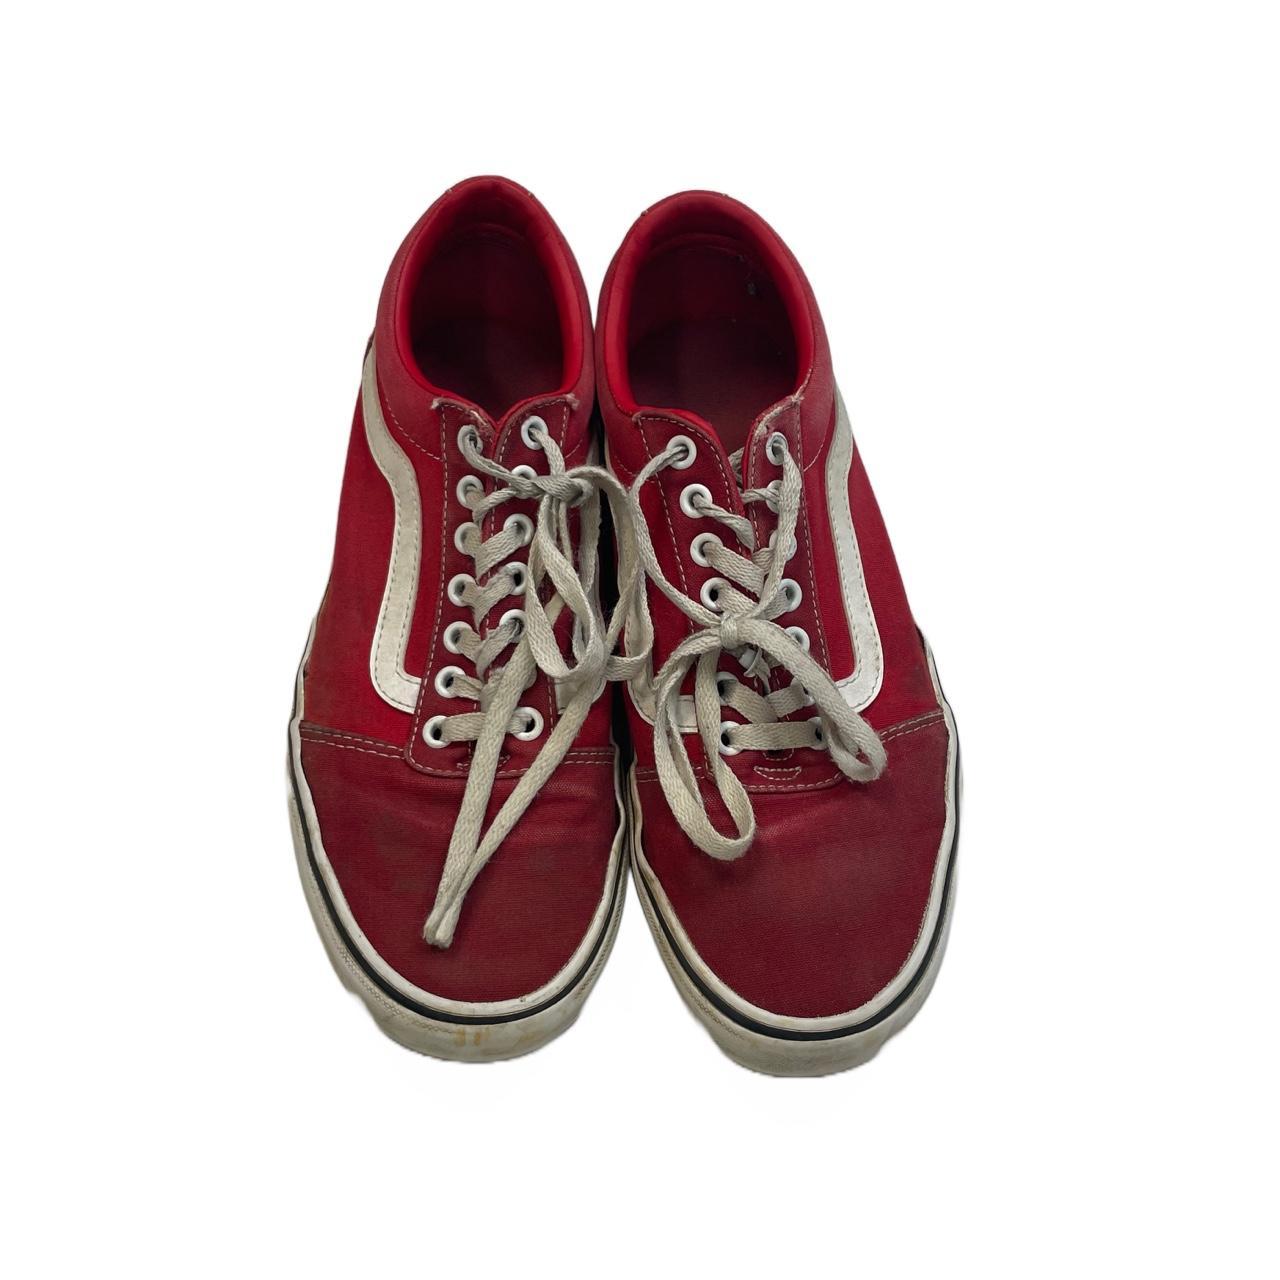 DIRTY BEAT UP RED VANS. THEY’RE PRETTY SCUFFED UP... - Depop